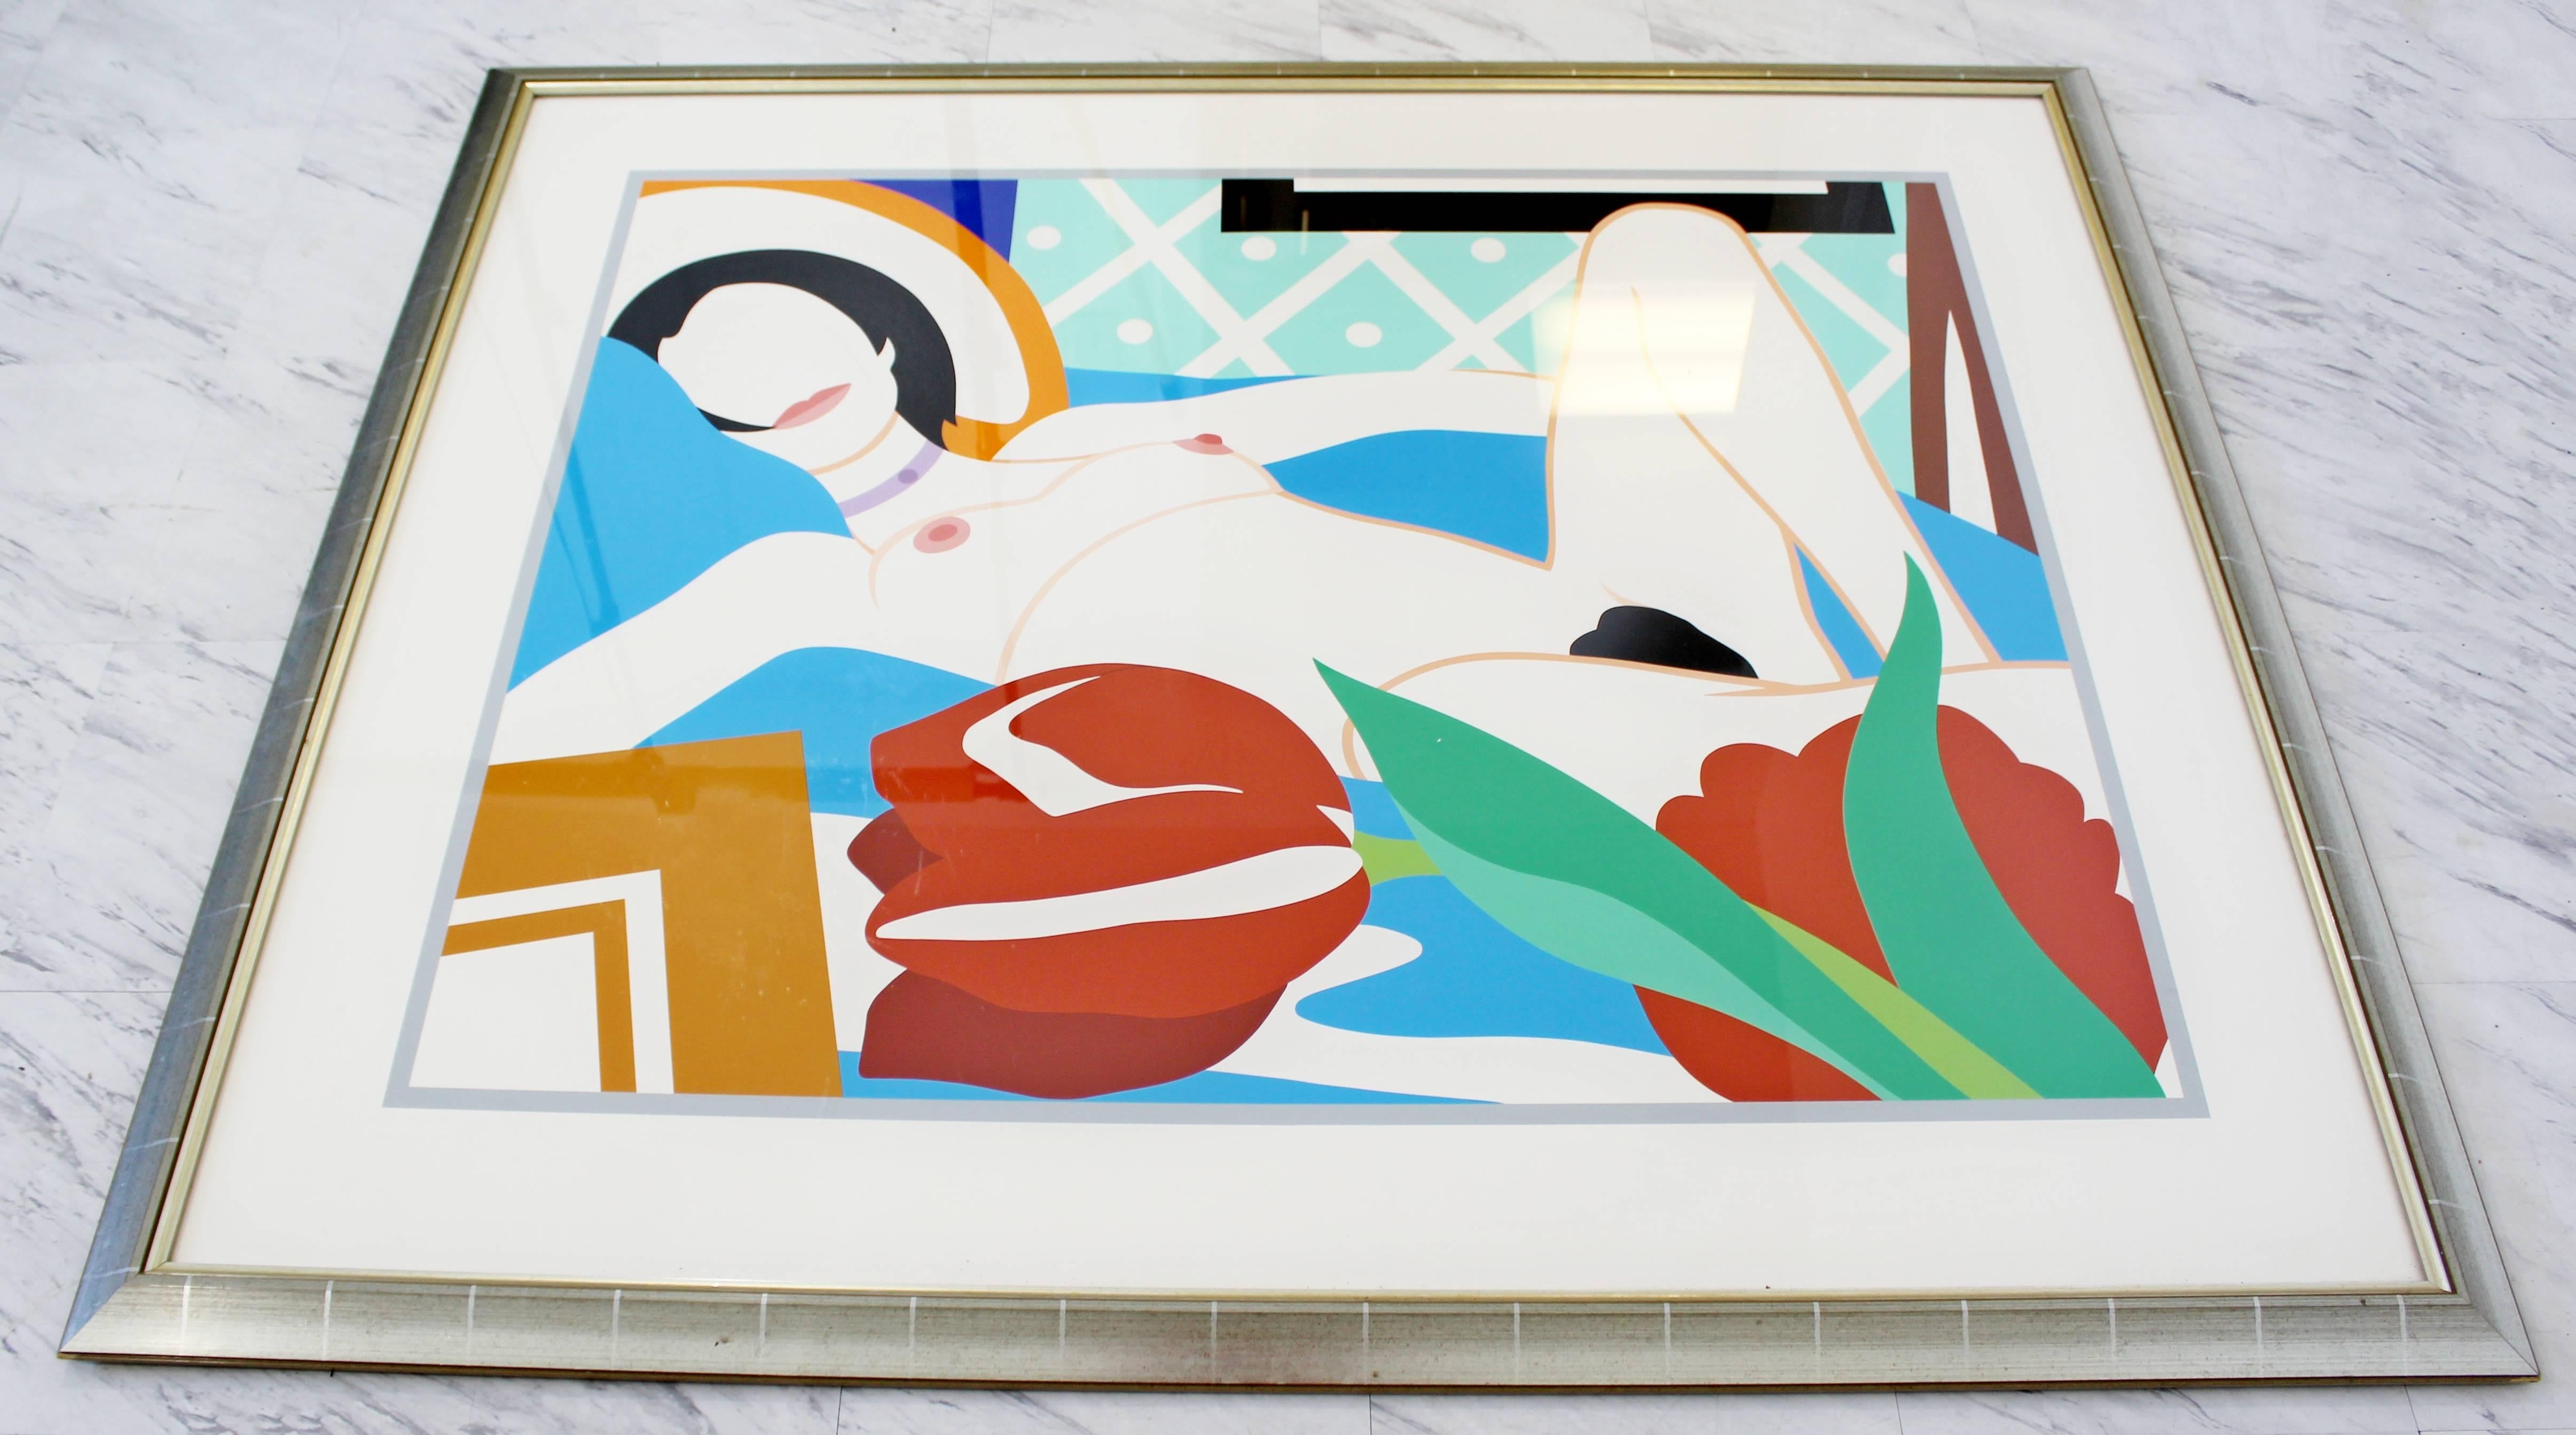 For your consideration is a magnificent, framed lithograph of Tom Wesselmann's 